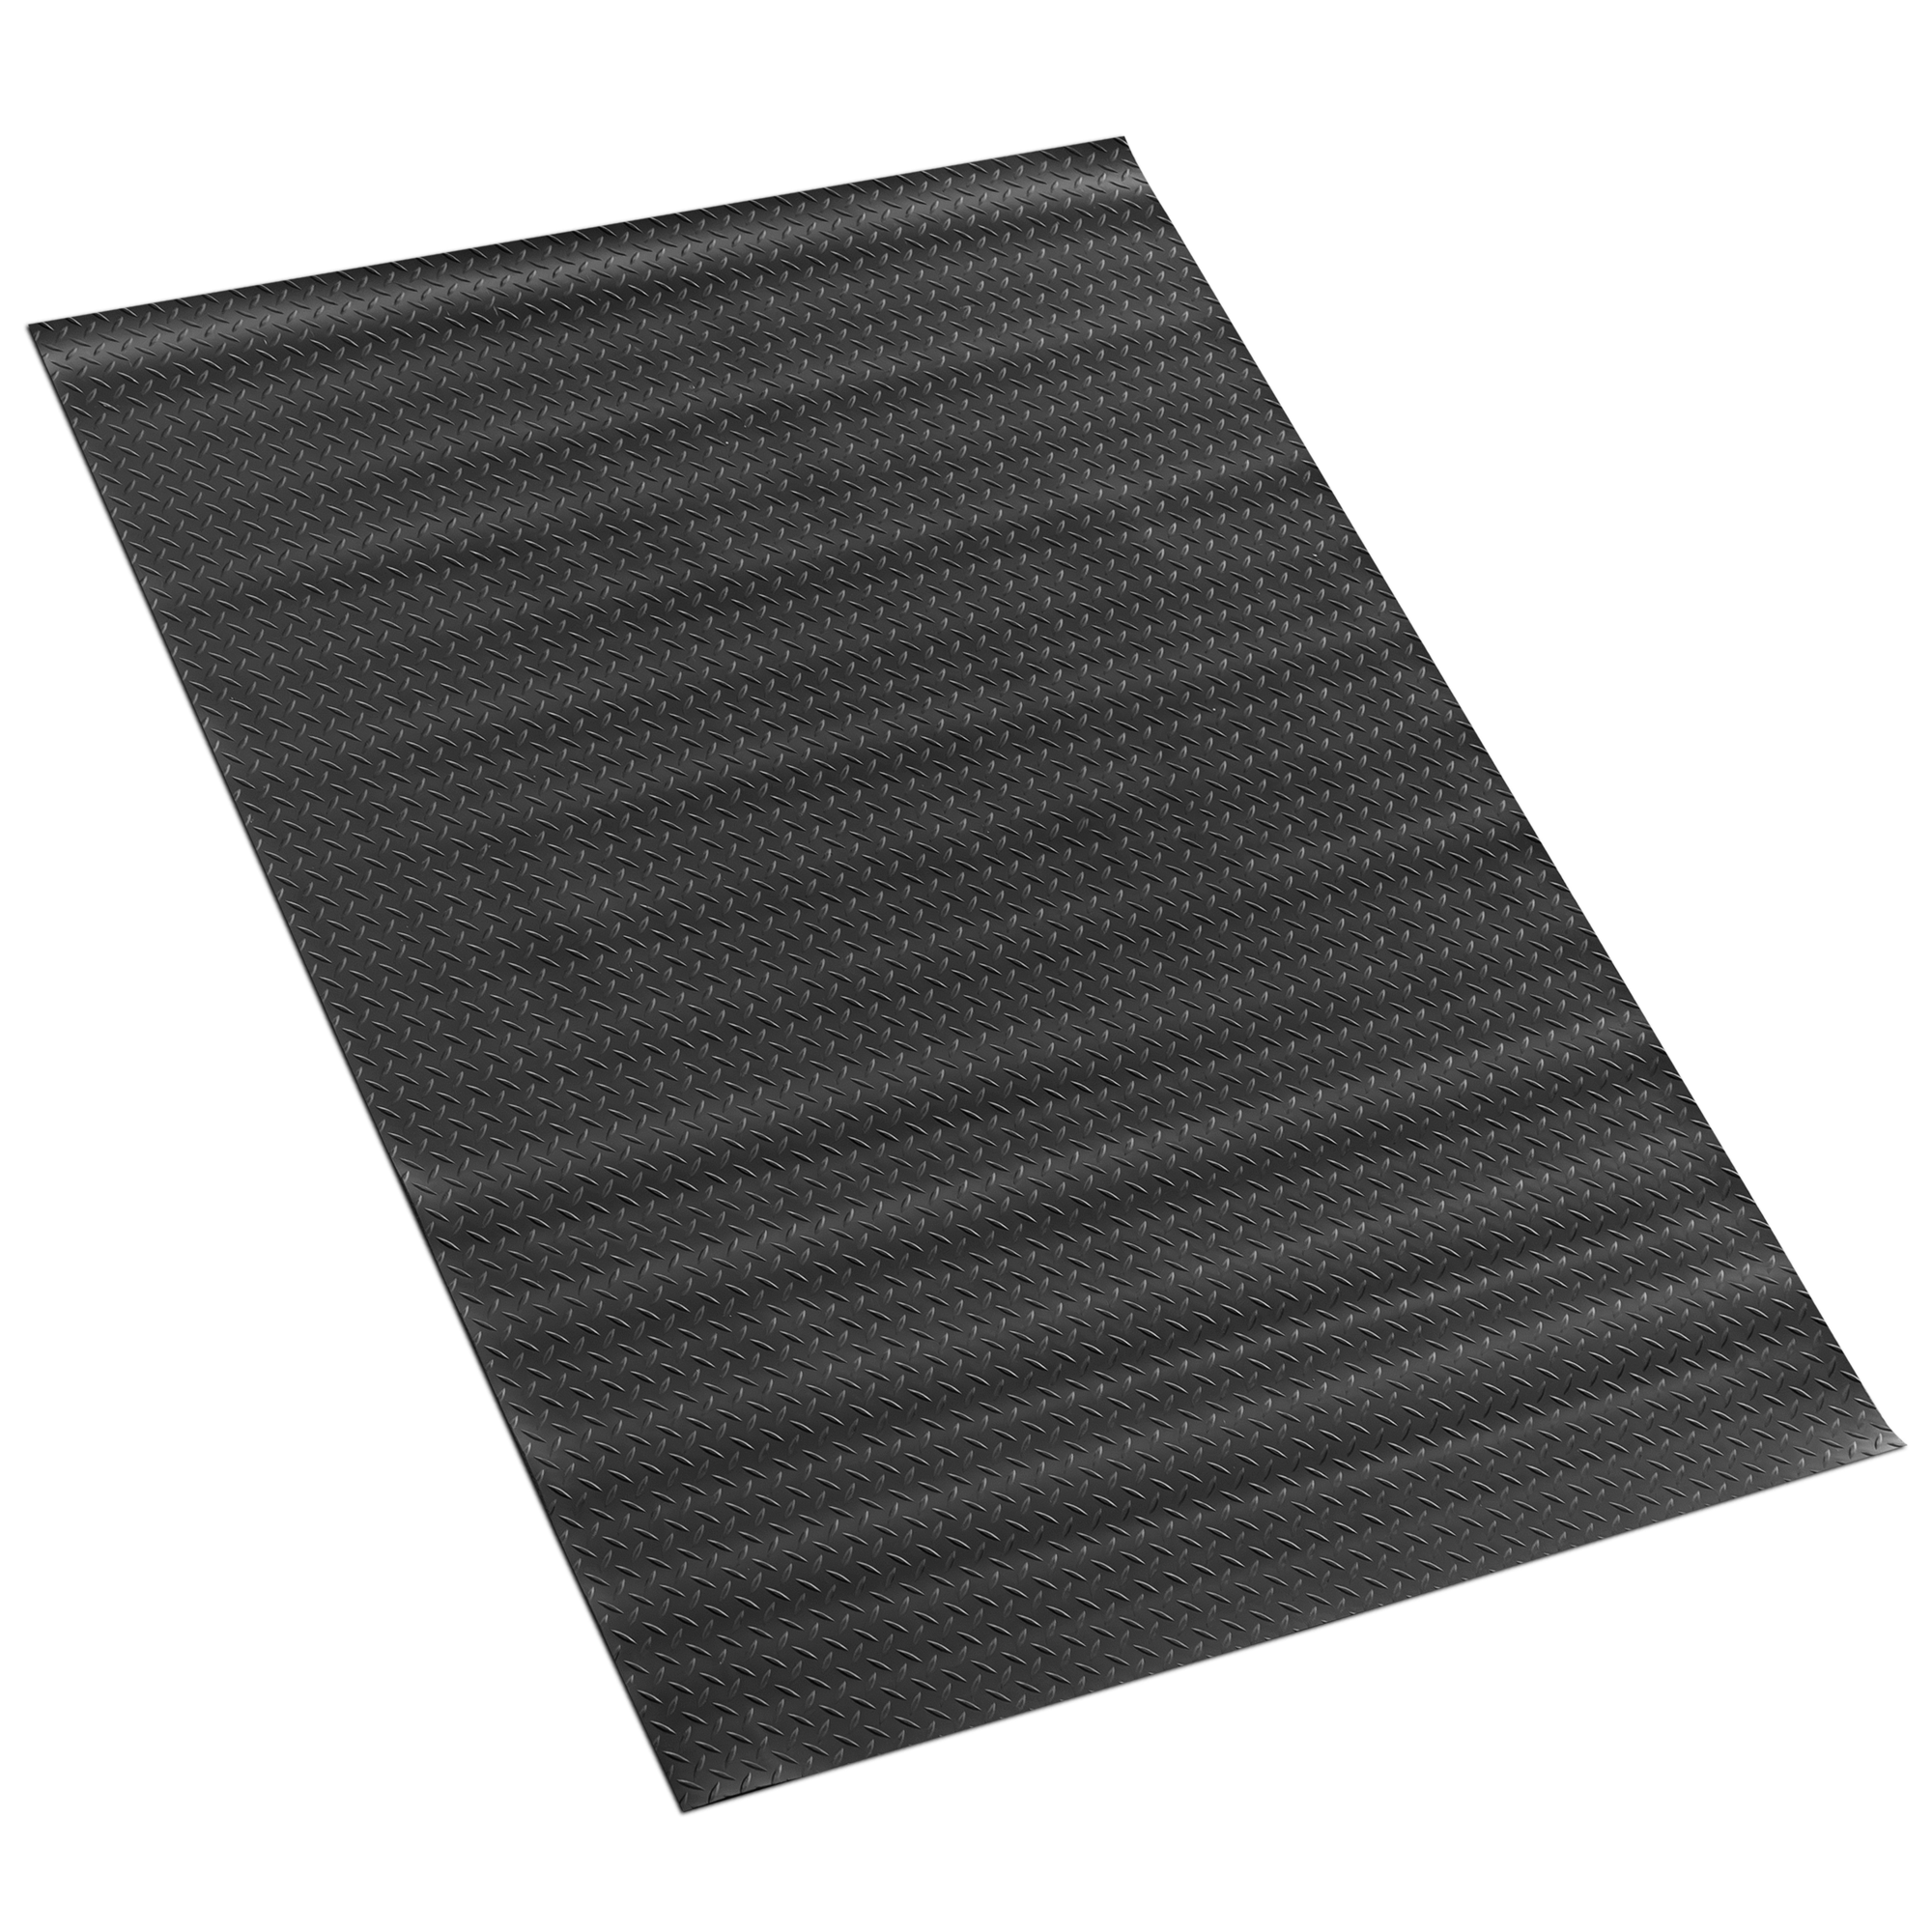 Motor Trend Utility Truck Bed Mat – All Weather Rubber Truck Bed Liner Mat Universal Size, Heavy Duty Protection for Your Truck,Van, or SUV, Pickup, Trim to Fit, Black, 4' x 6'